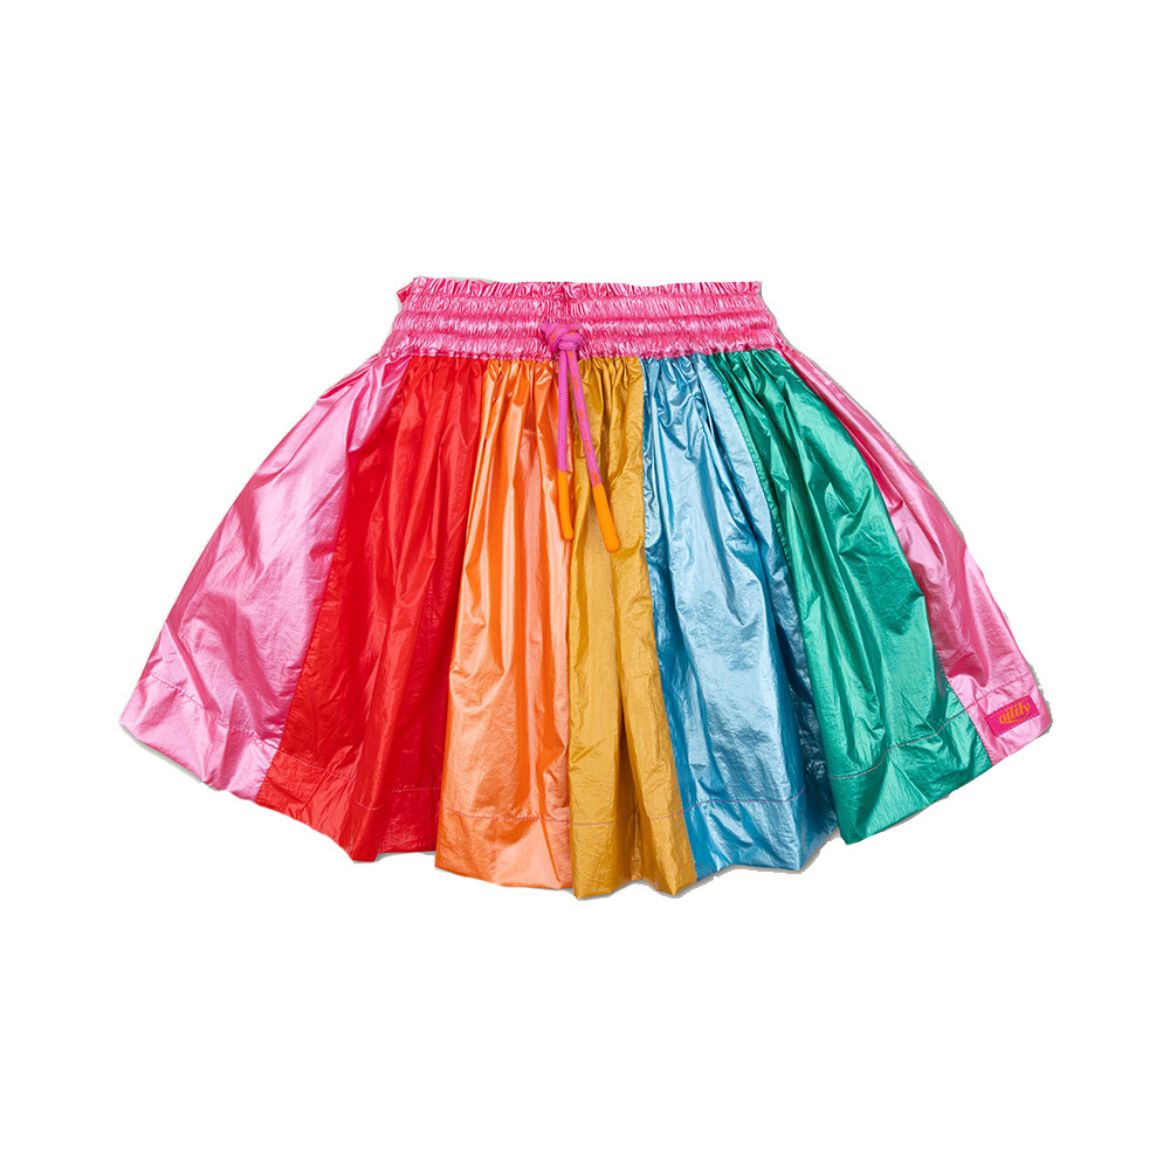 Picture of Oilily Girls Sircus Multicolour Skirt